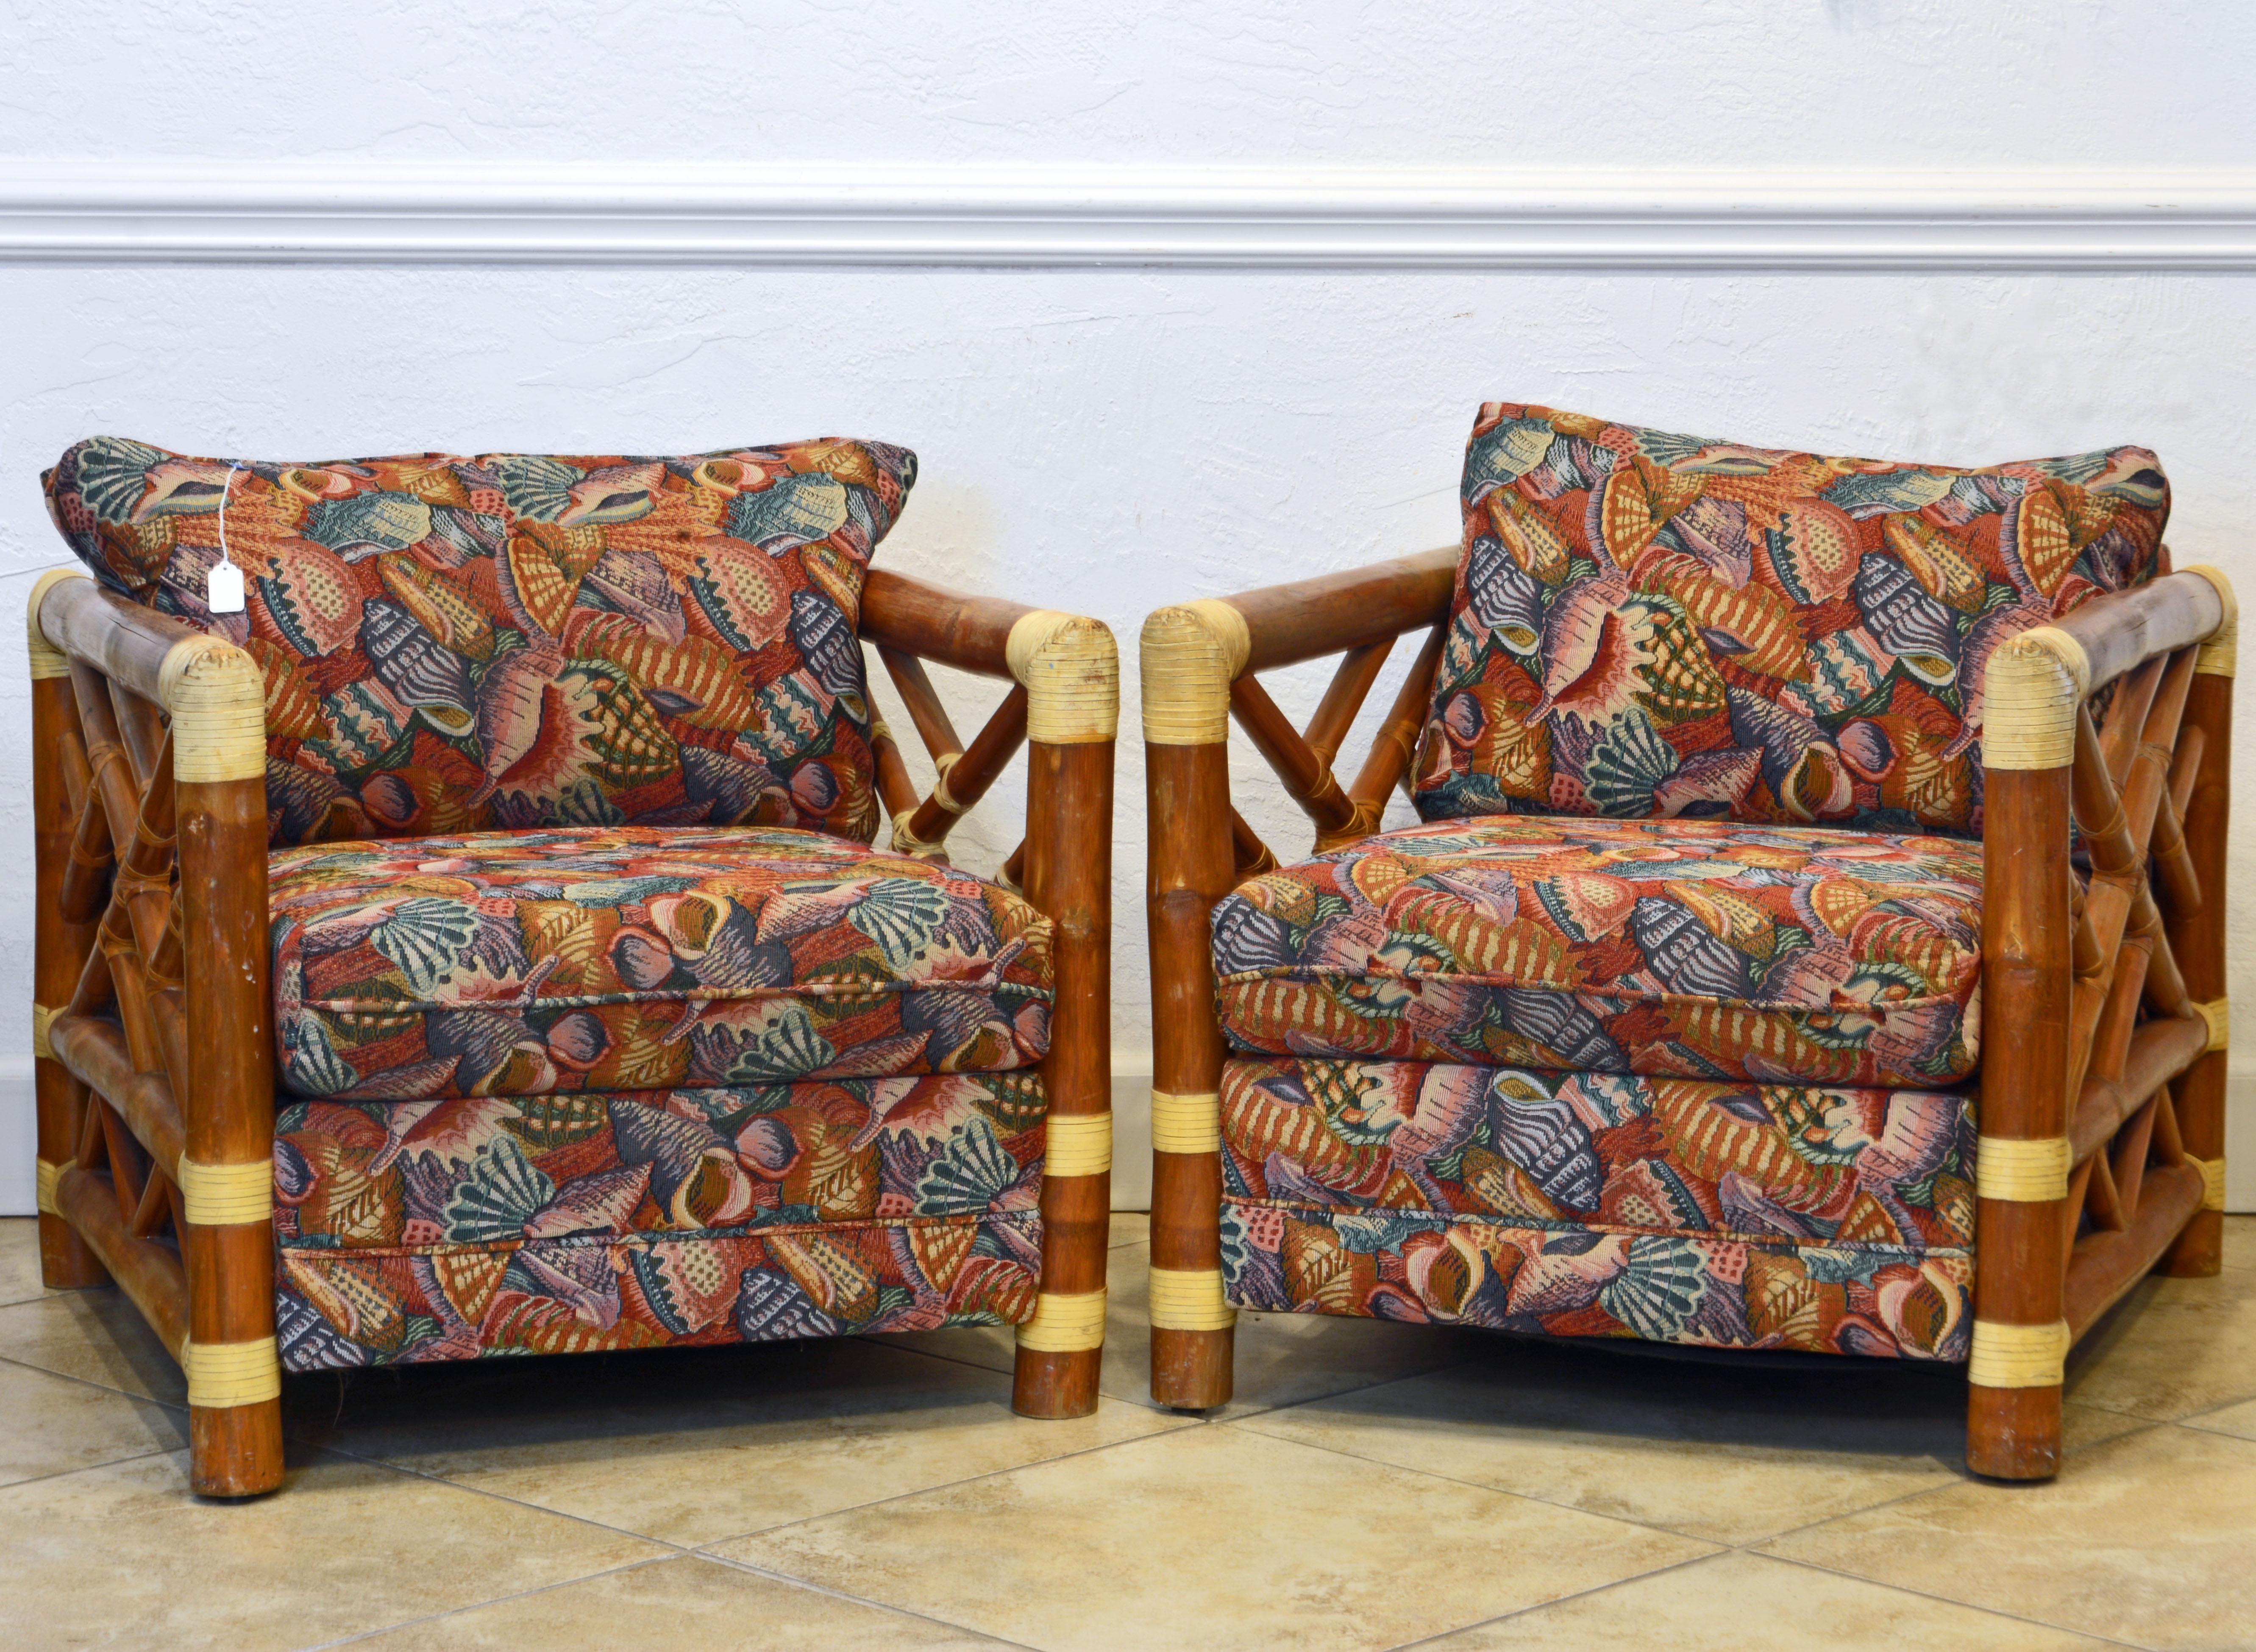 A pair of vintage colonial and tropical style bamboo pole lounge chairs of generous proportions, dating to the 1970s, upholstered with loose cushions and back pillows. The fabric strikes a coastal note with shells and sea elements. The chairs are